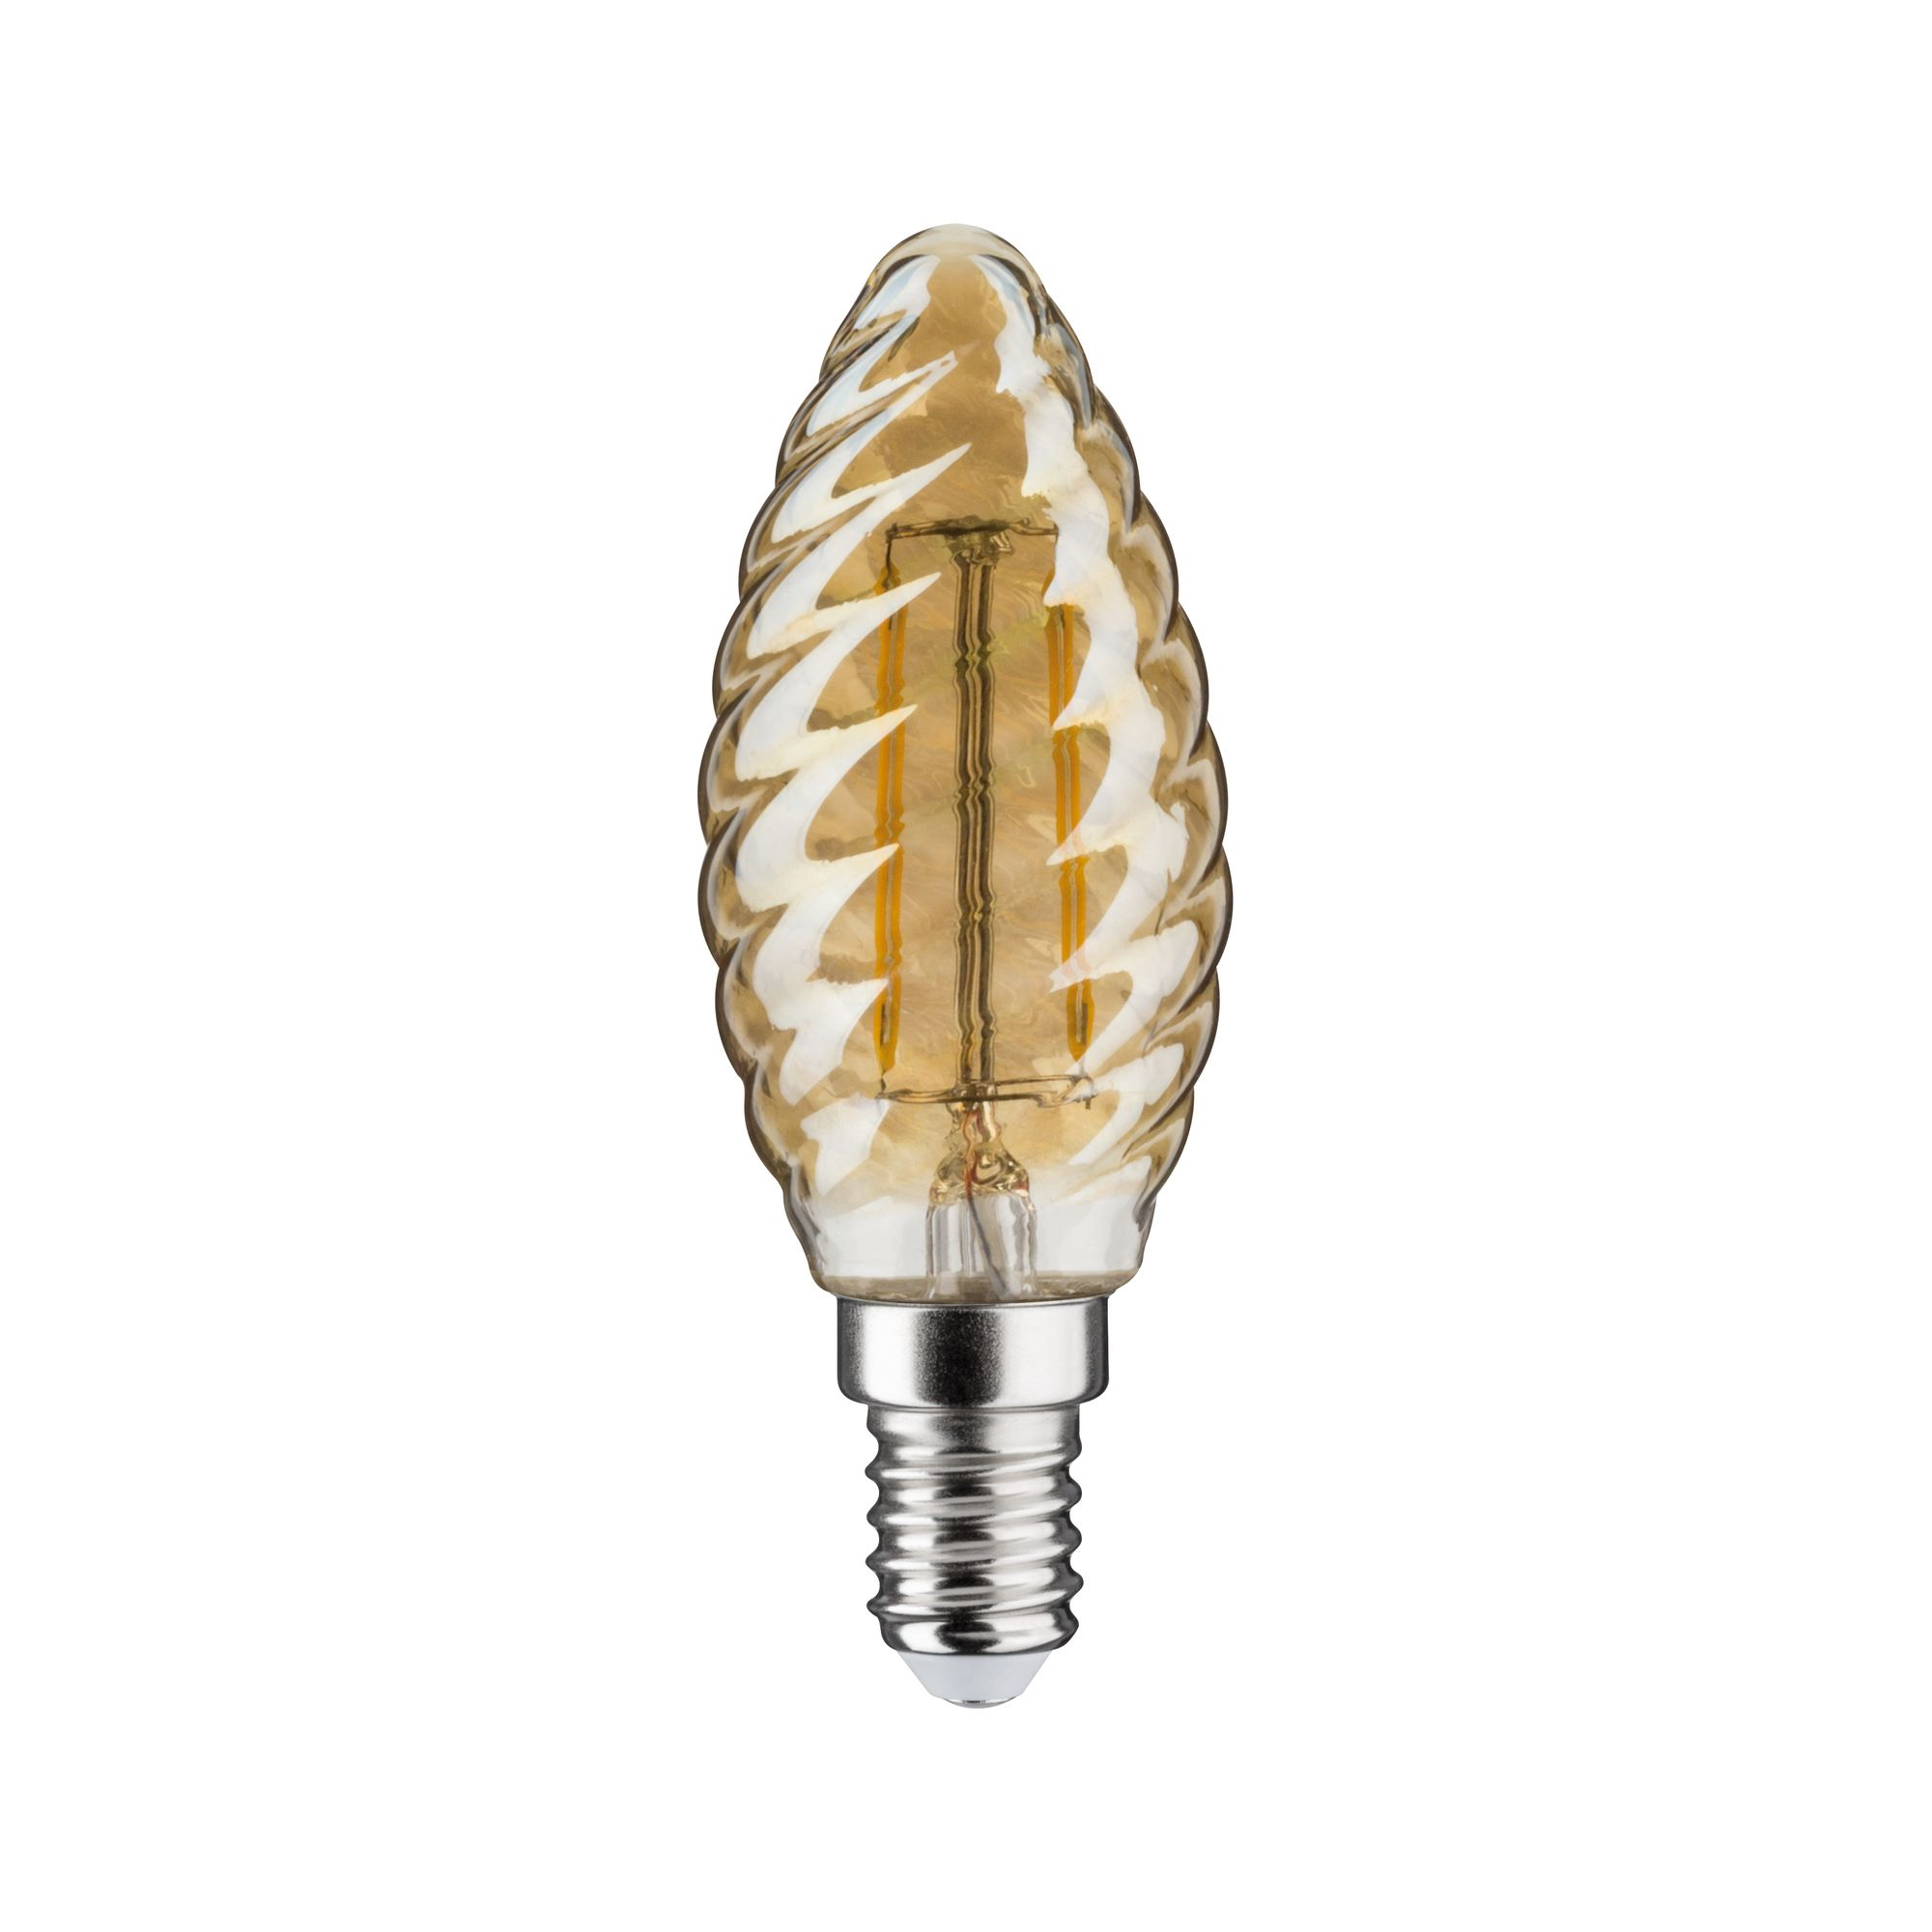 LED-Kerzenlampe E14 4,7W (37W) 430 lm warmgold + product picture